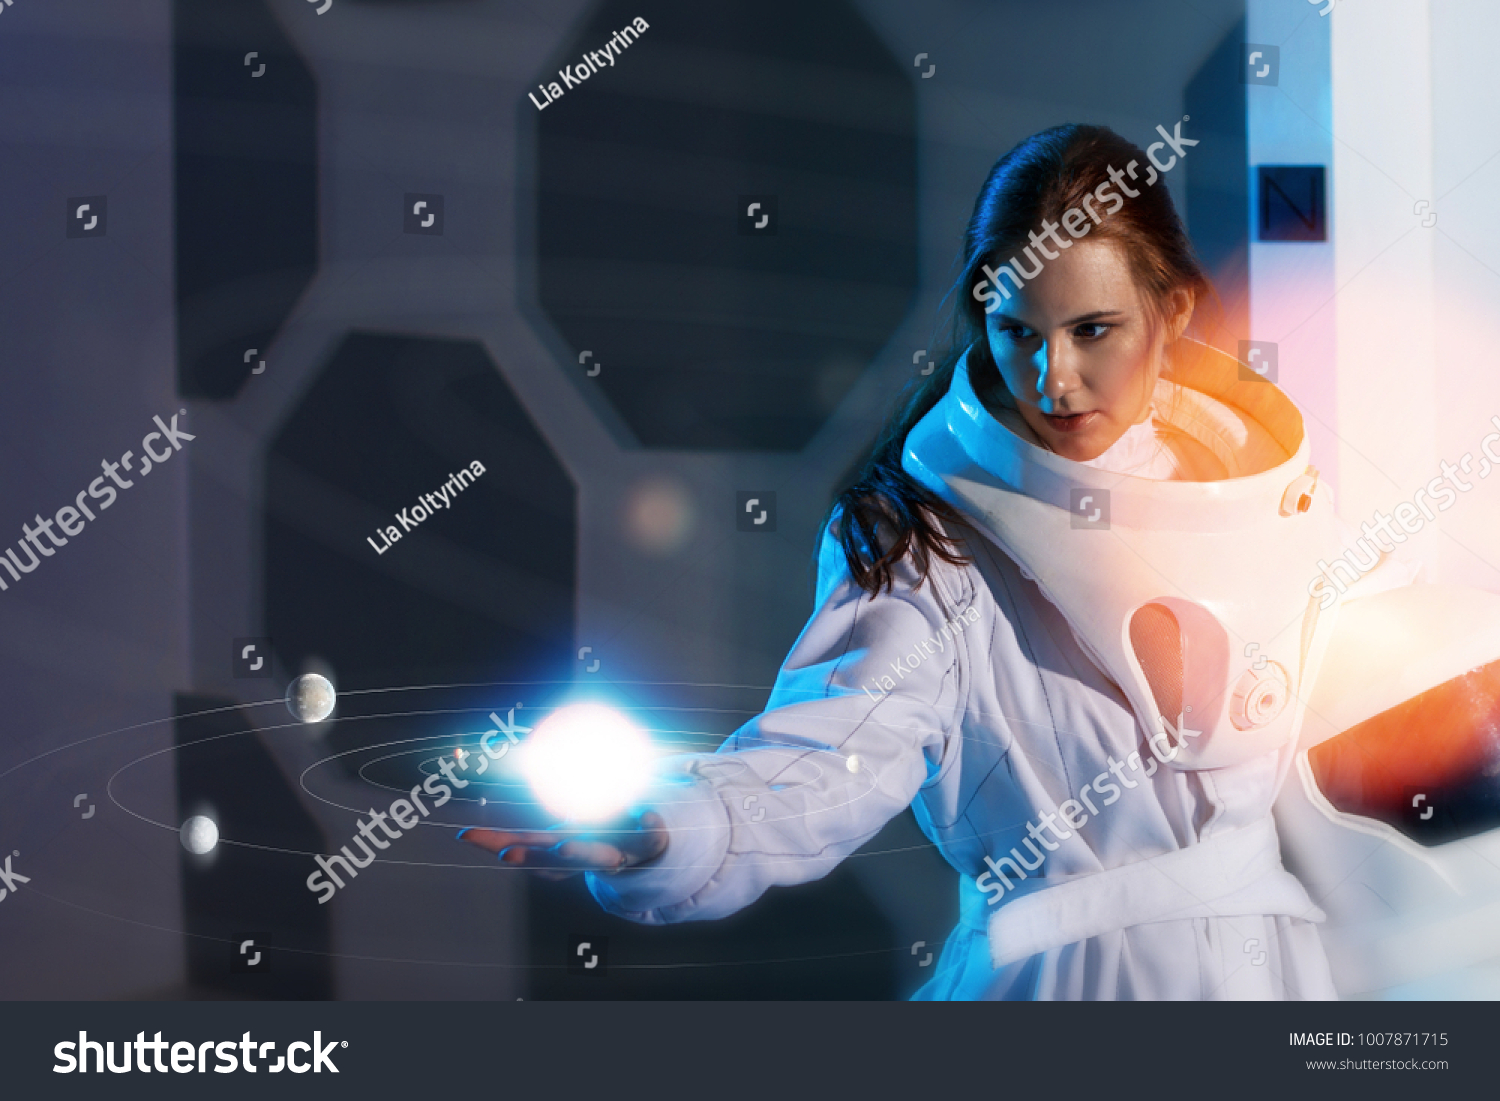 Portrait of a woman astronaut in a space suit, dreamy look up #1007871715